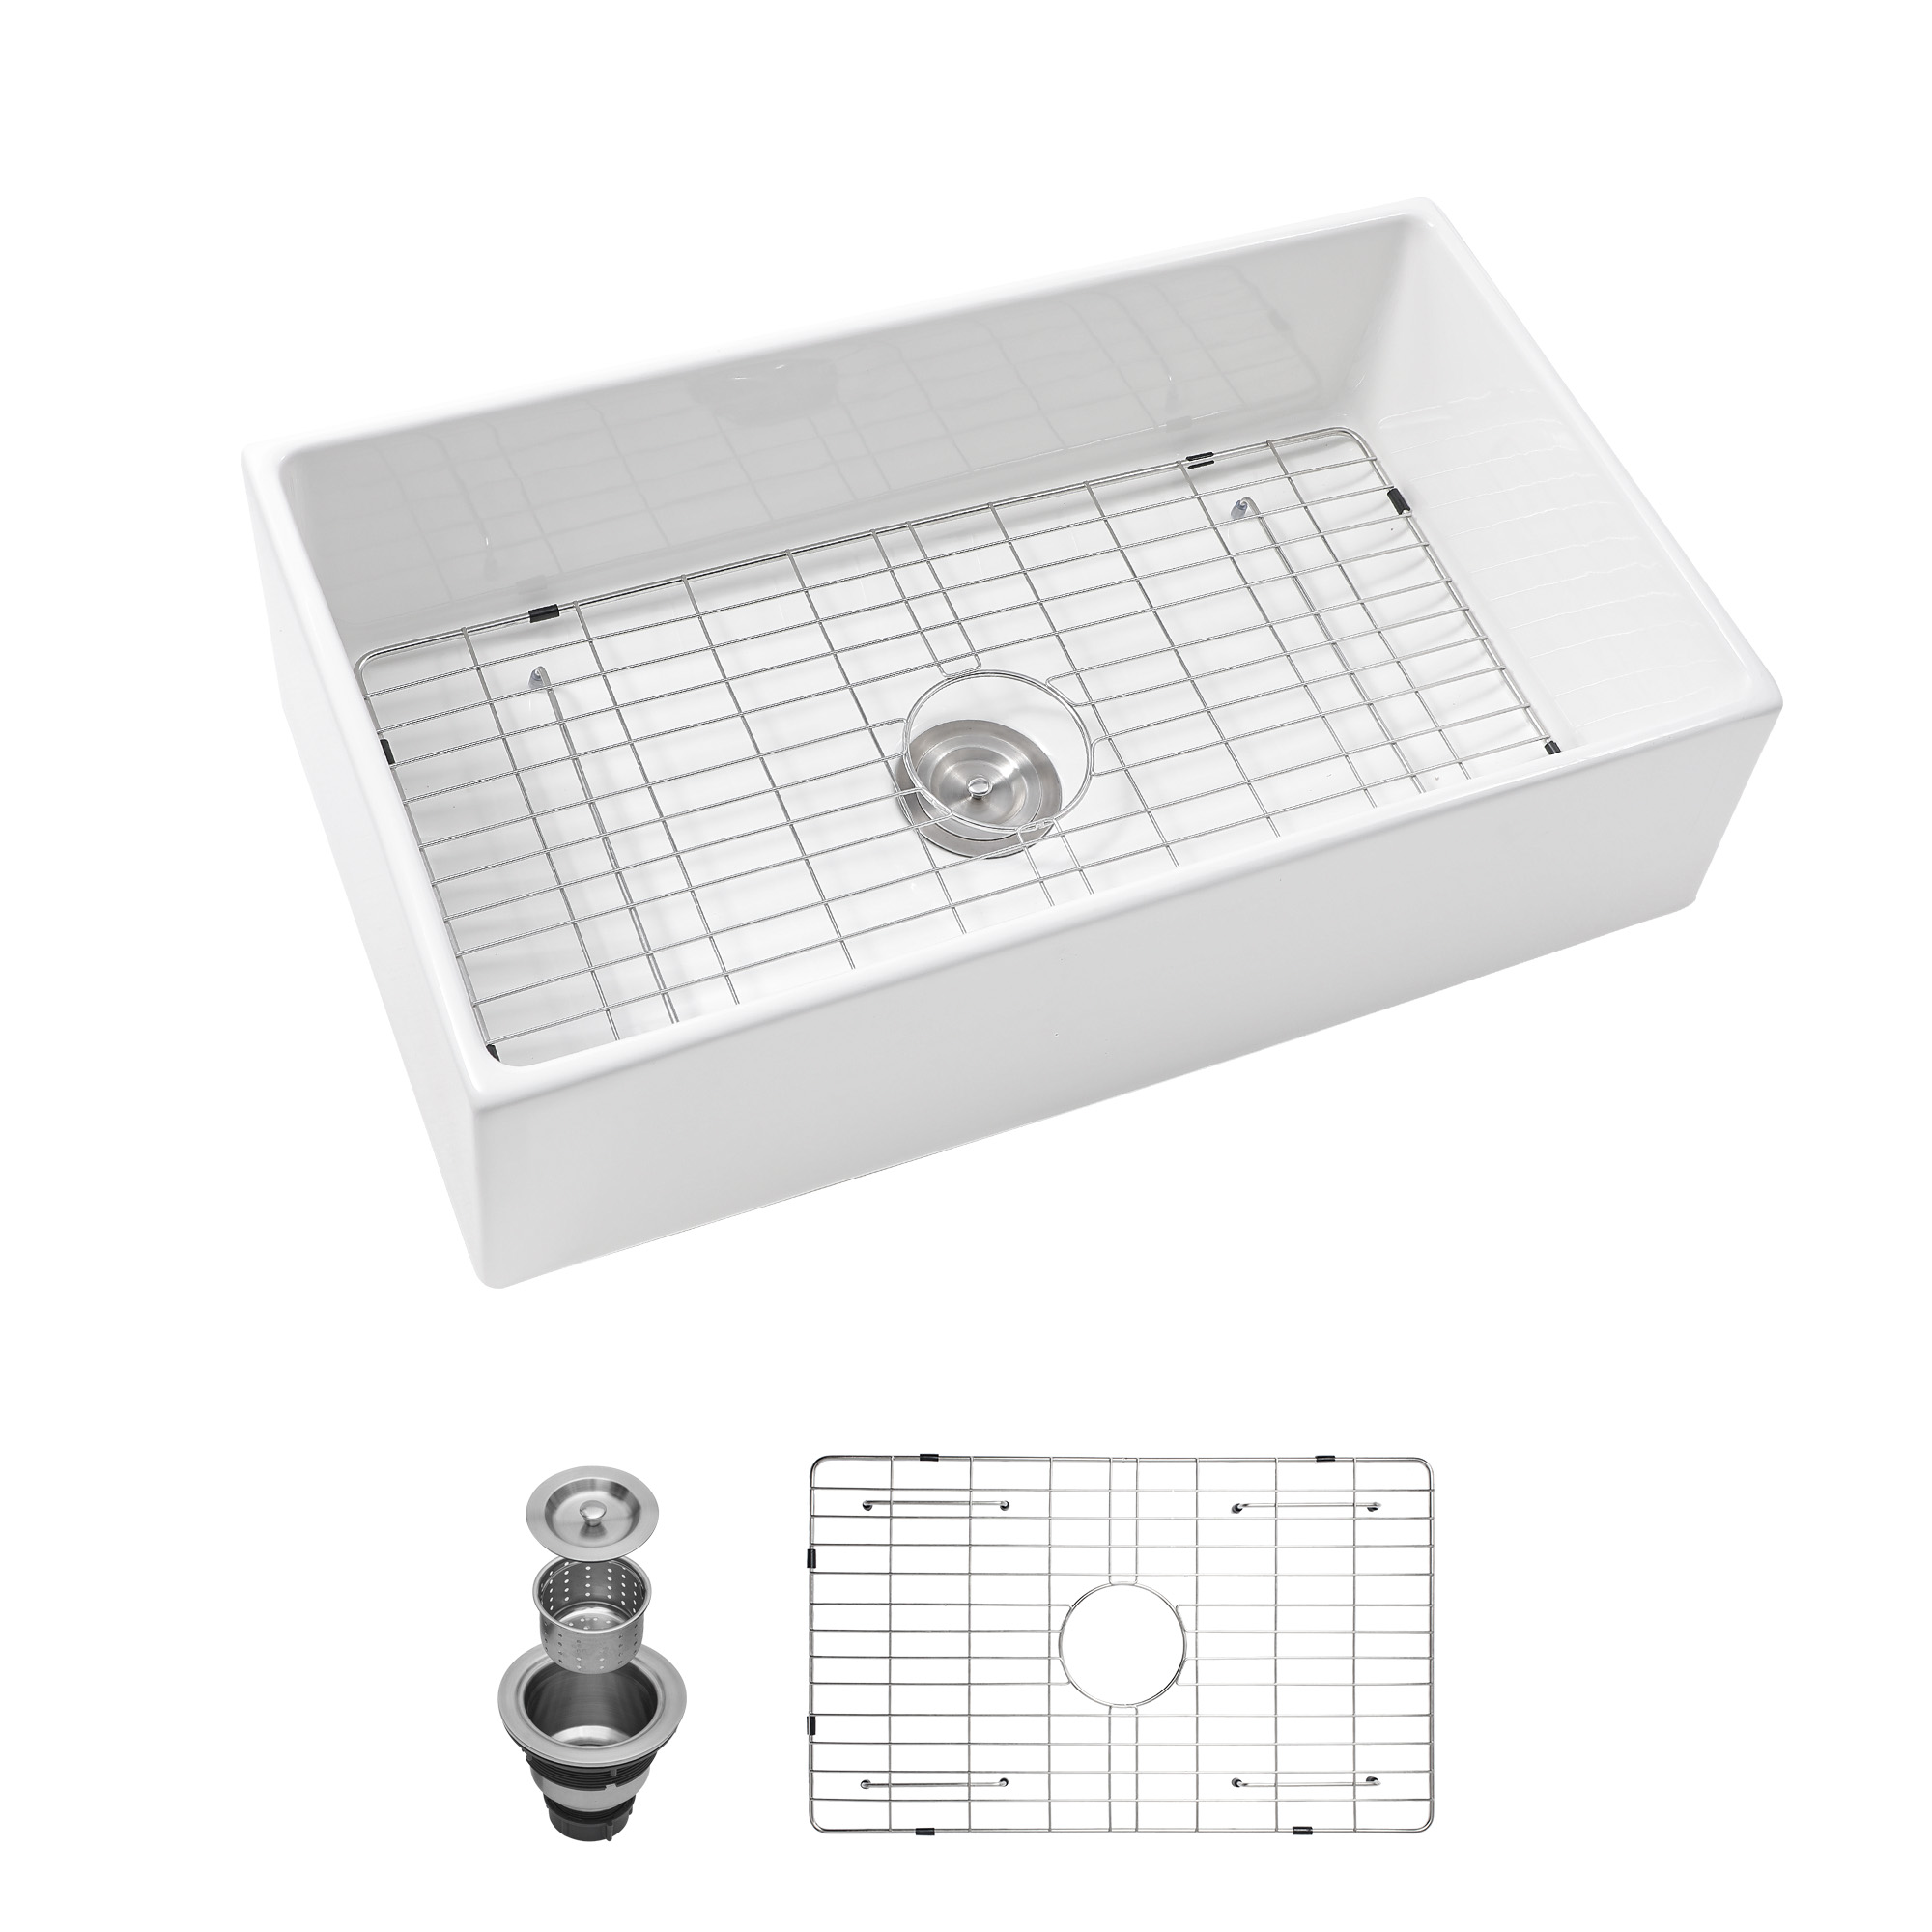 30 White Farmhouse Sink - 30 Inch Kitchen Sink White Undermount Single Bowl Apron Front Ceremic Sink Farm Style Drain Asseblemly and Bottom Grate 30x18x10 Inch